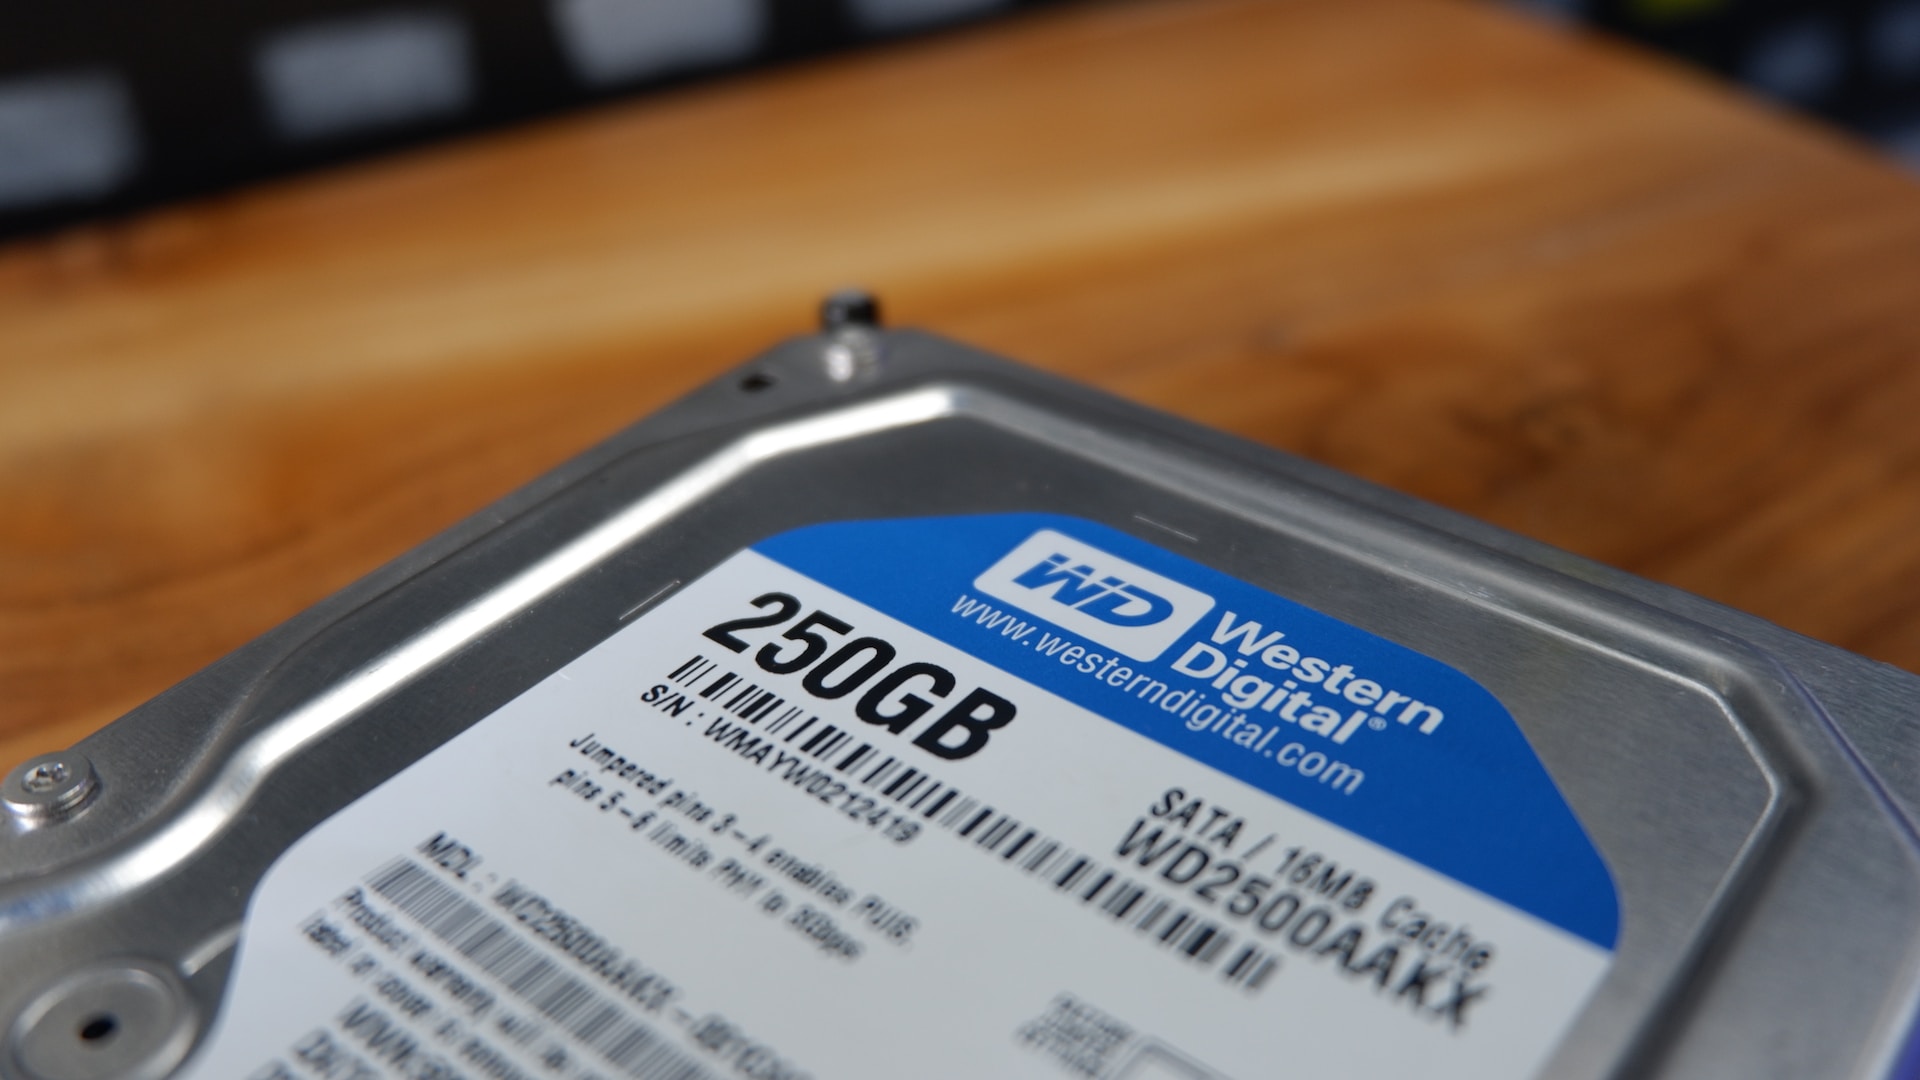 SSDs vs. HDDs: Which Is The Better Storage Option For Your PC?